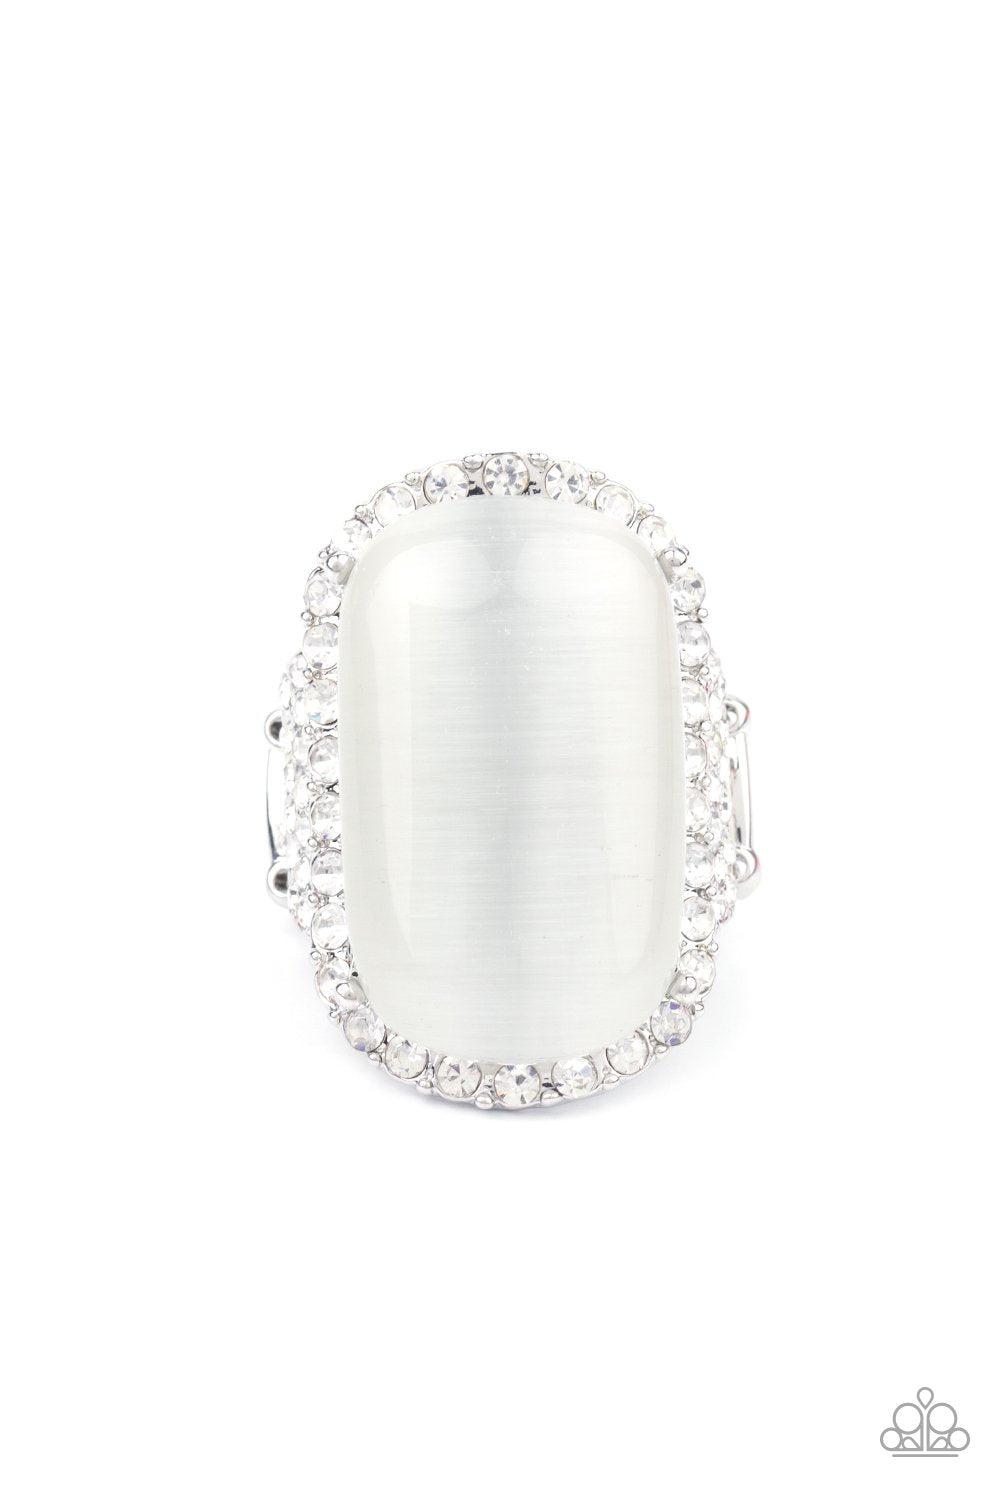 Thank Your LUXE-y Stars White Moonstone Ring - Paparazzi Accessories LOTP Exclusive July 2021- lightbox - CarasShop.com - $5 Jewelry by Cara Jewels